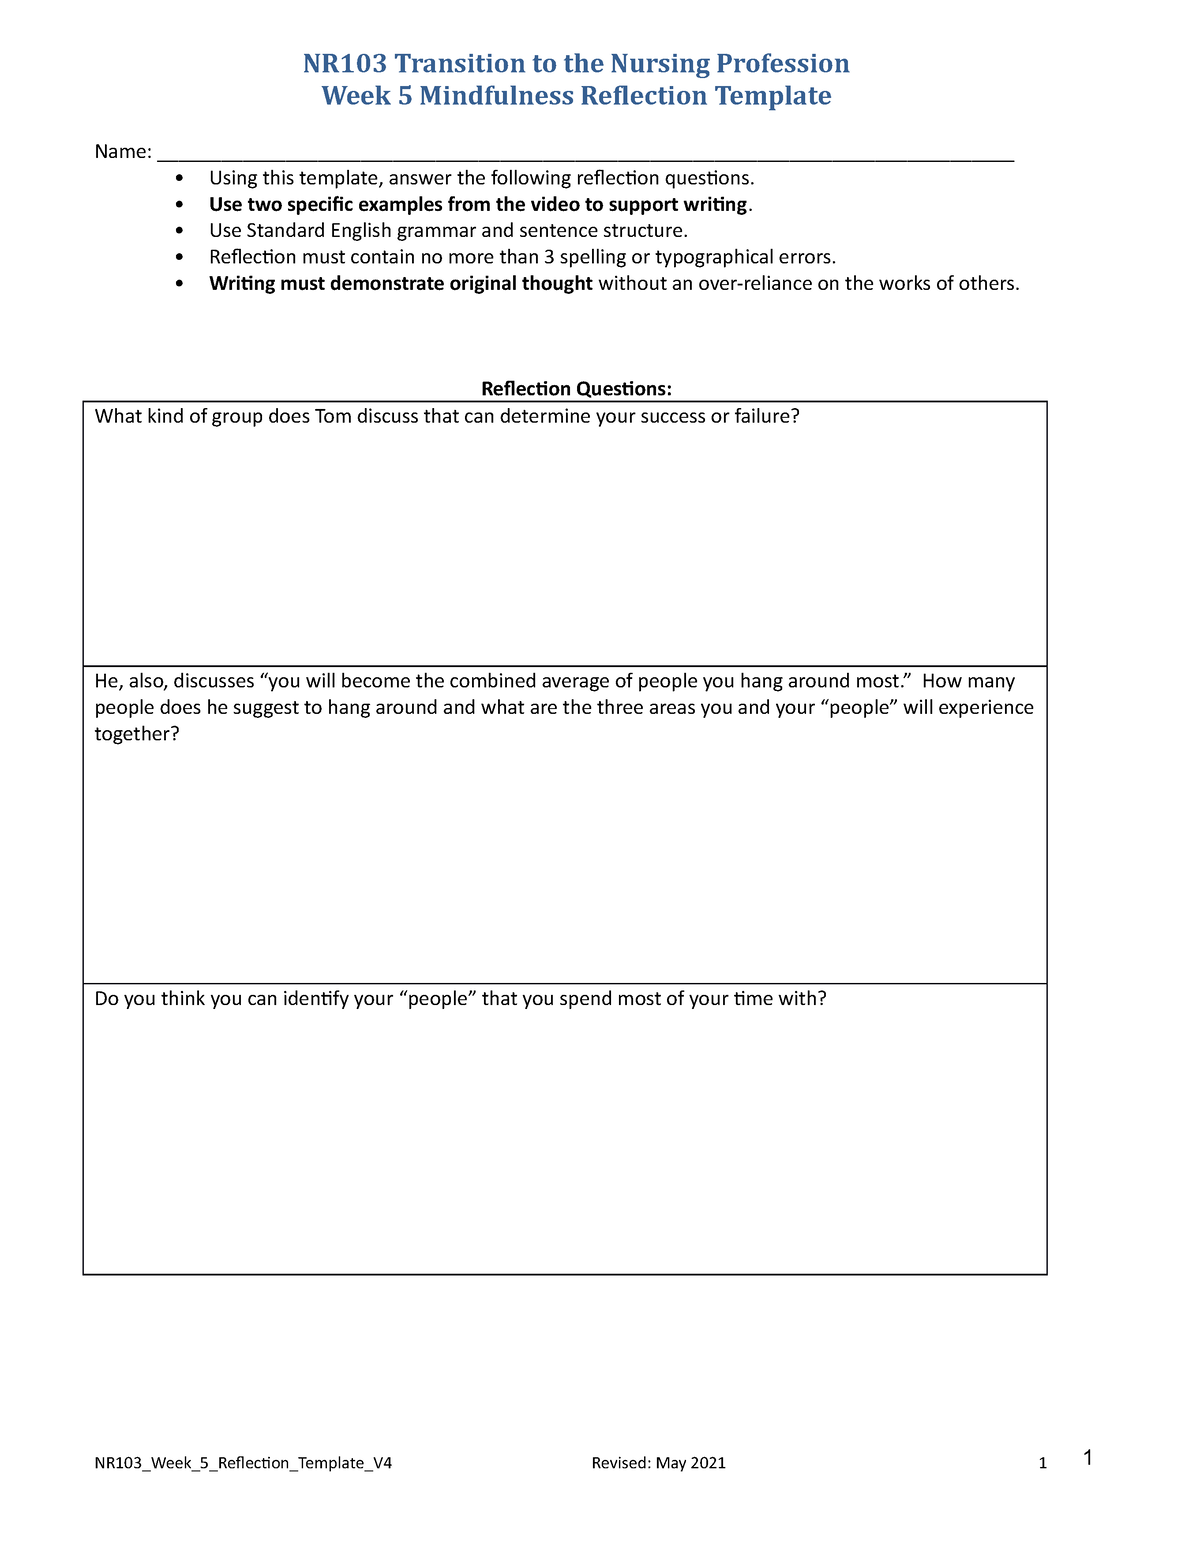 NR103 Week5 Reflection Template May2021 - NR103 Transition to the ...